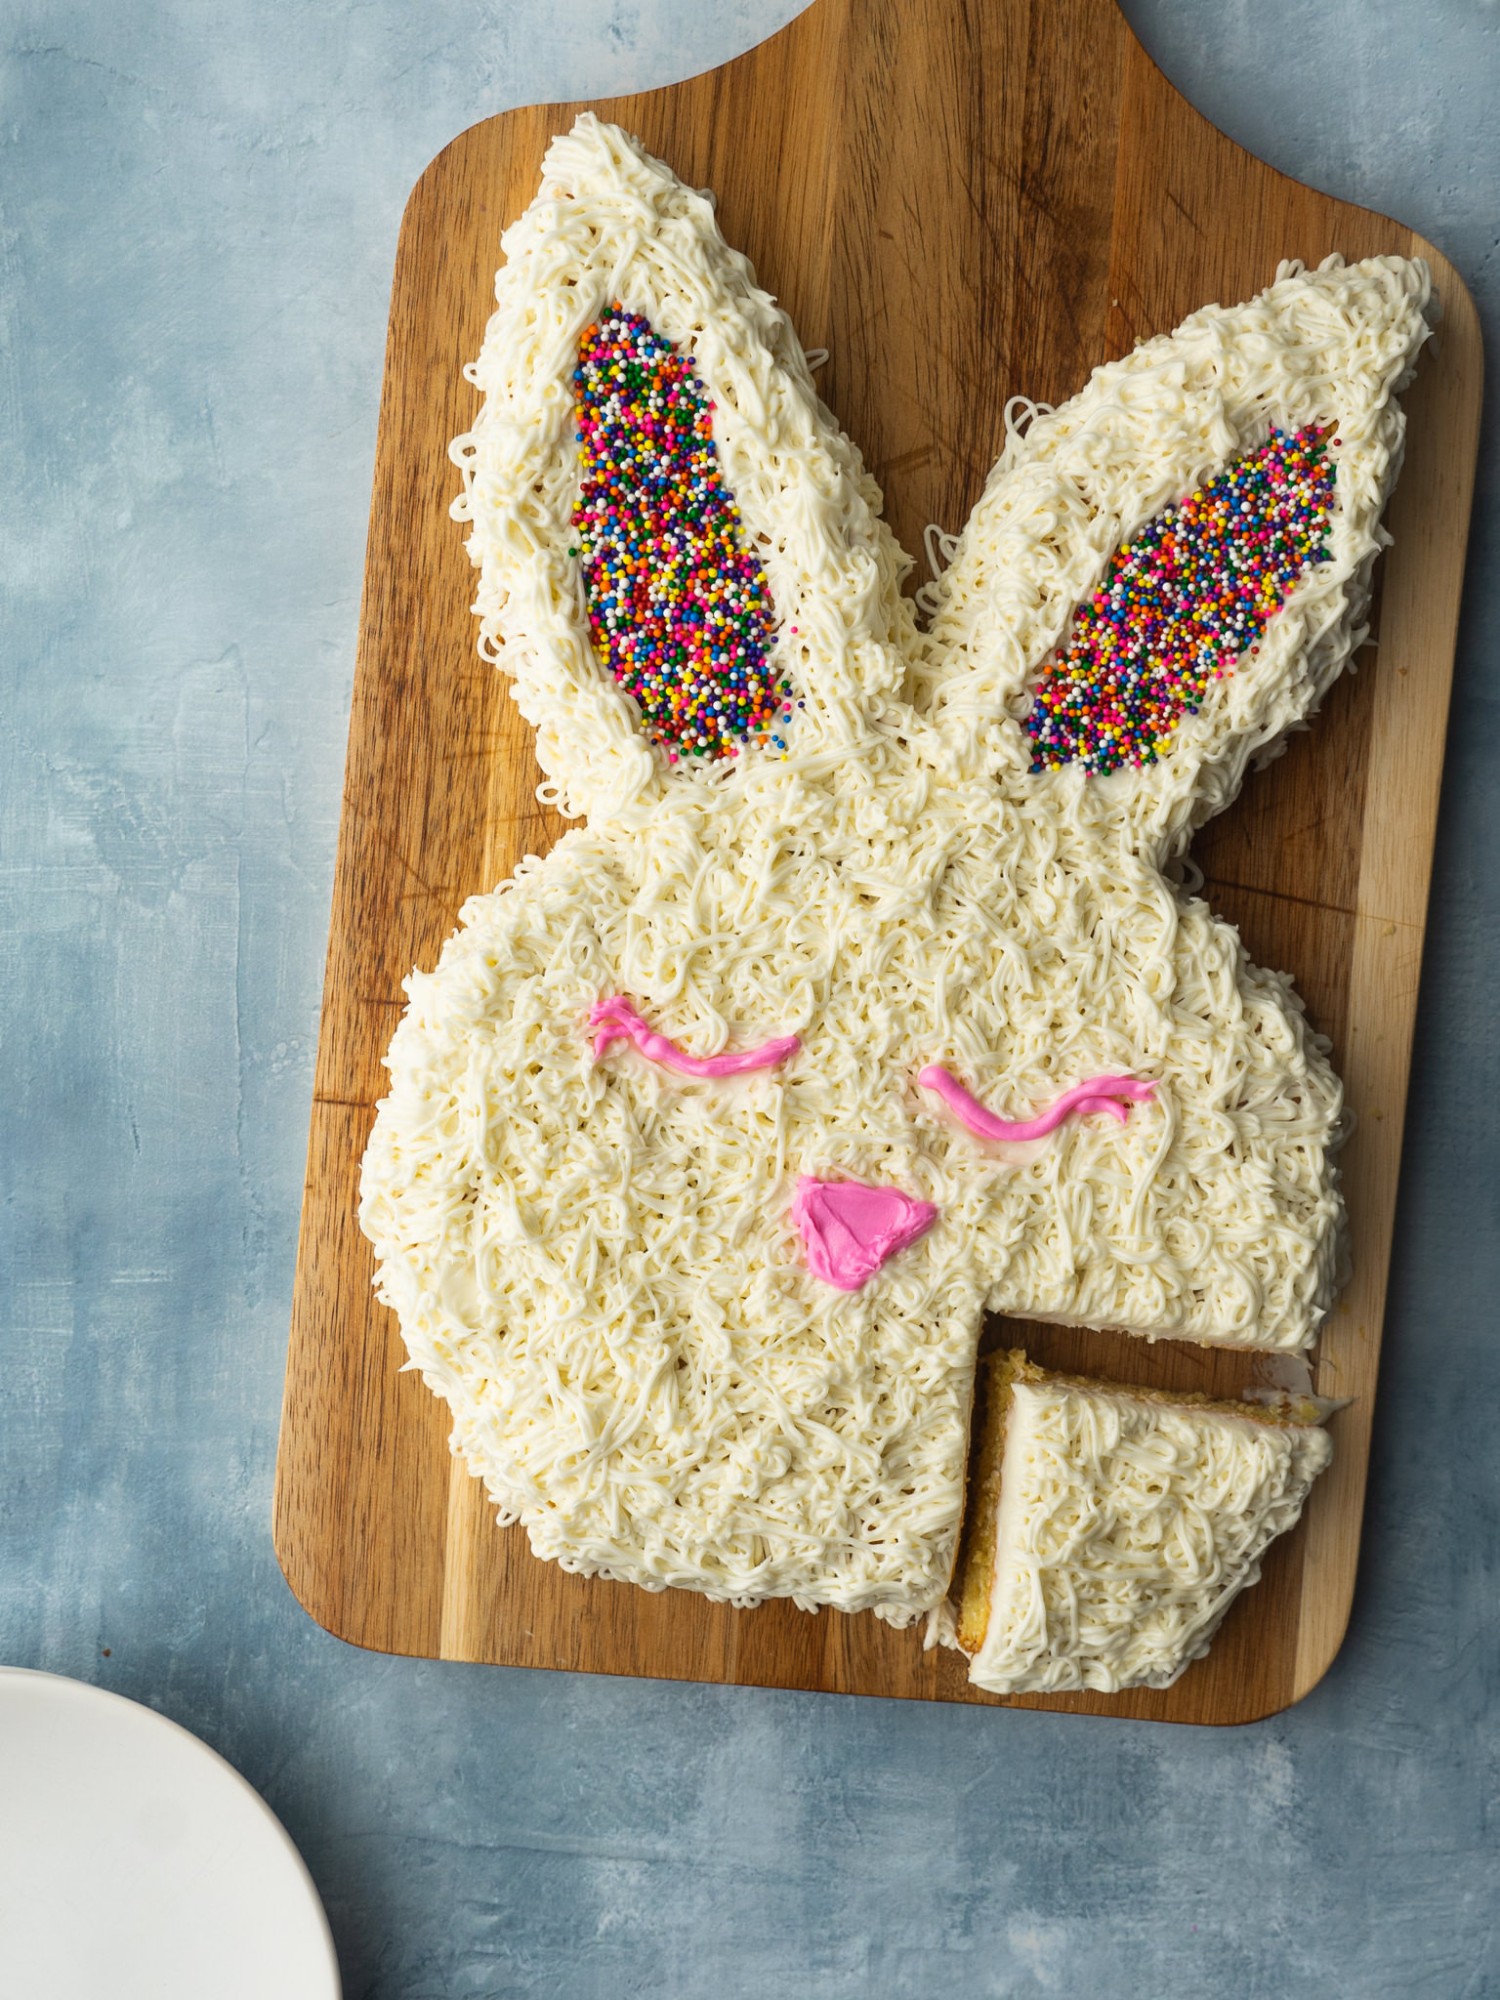 bunny cake for easter with a slice cut out